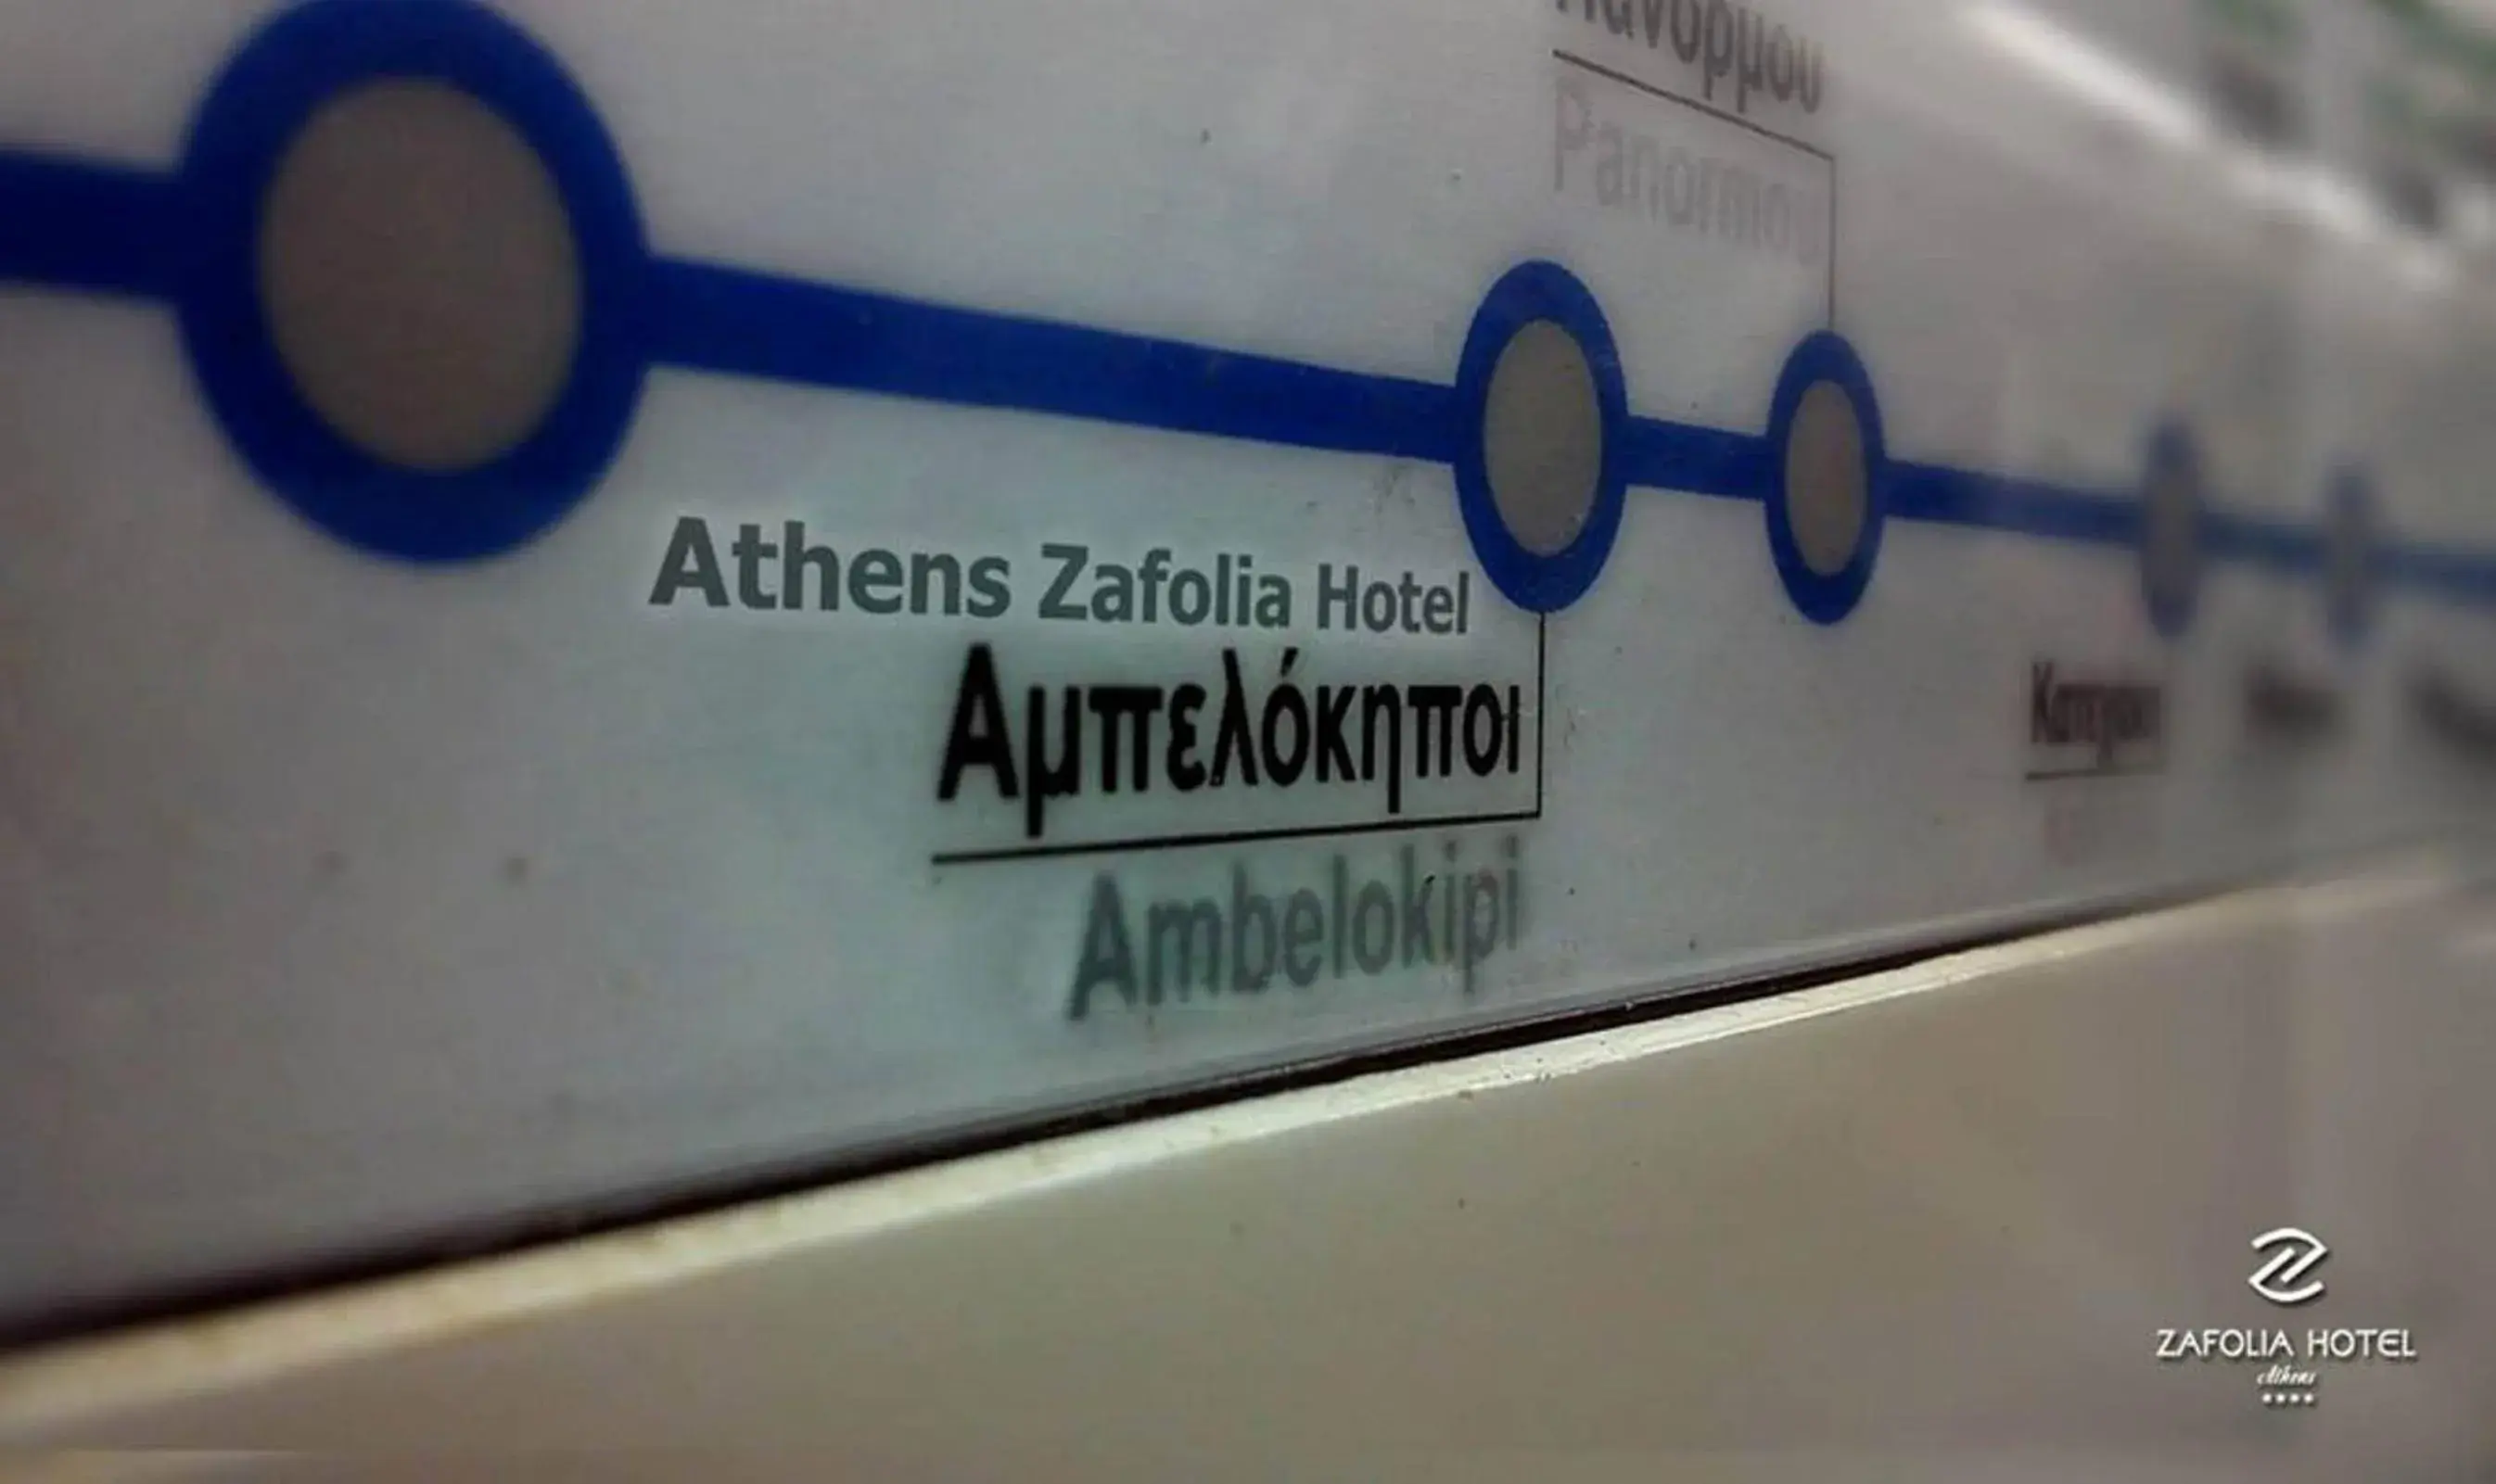 Off site in Athens Zafolia Hotel